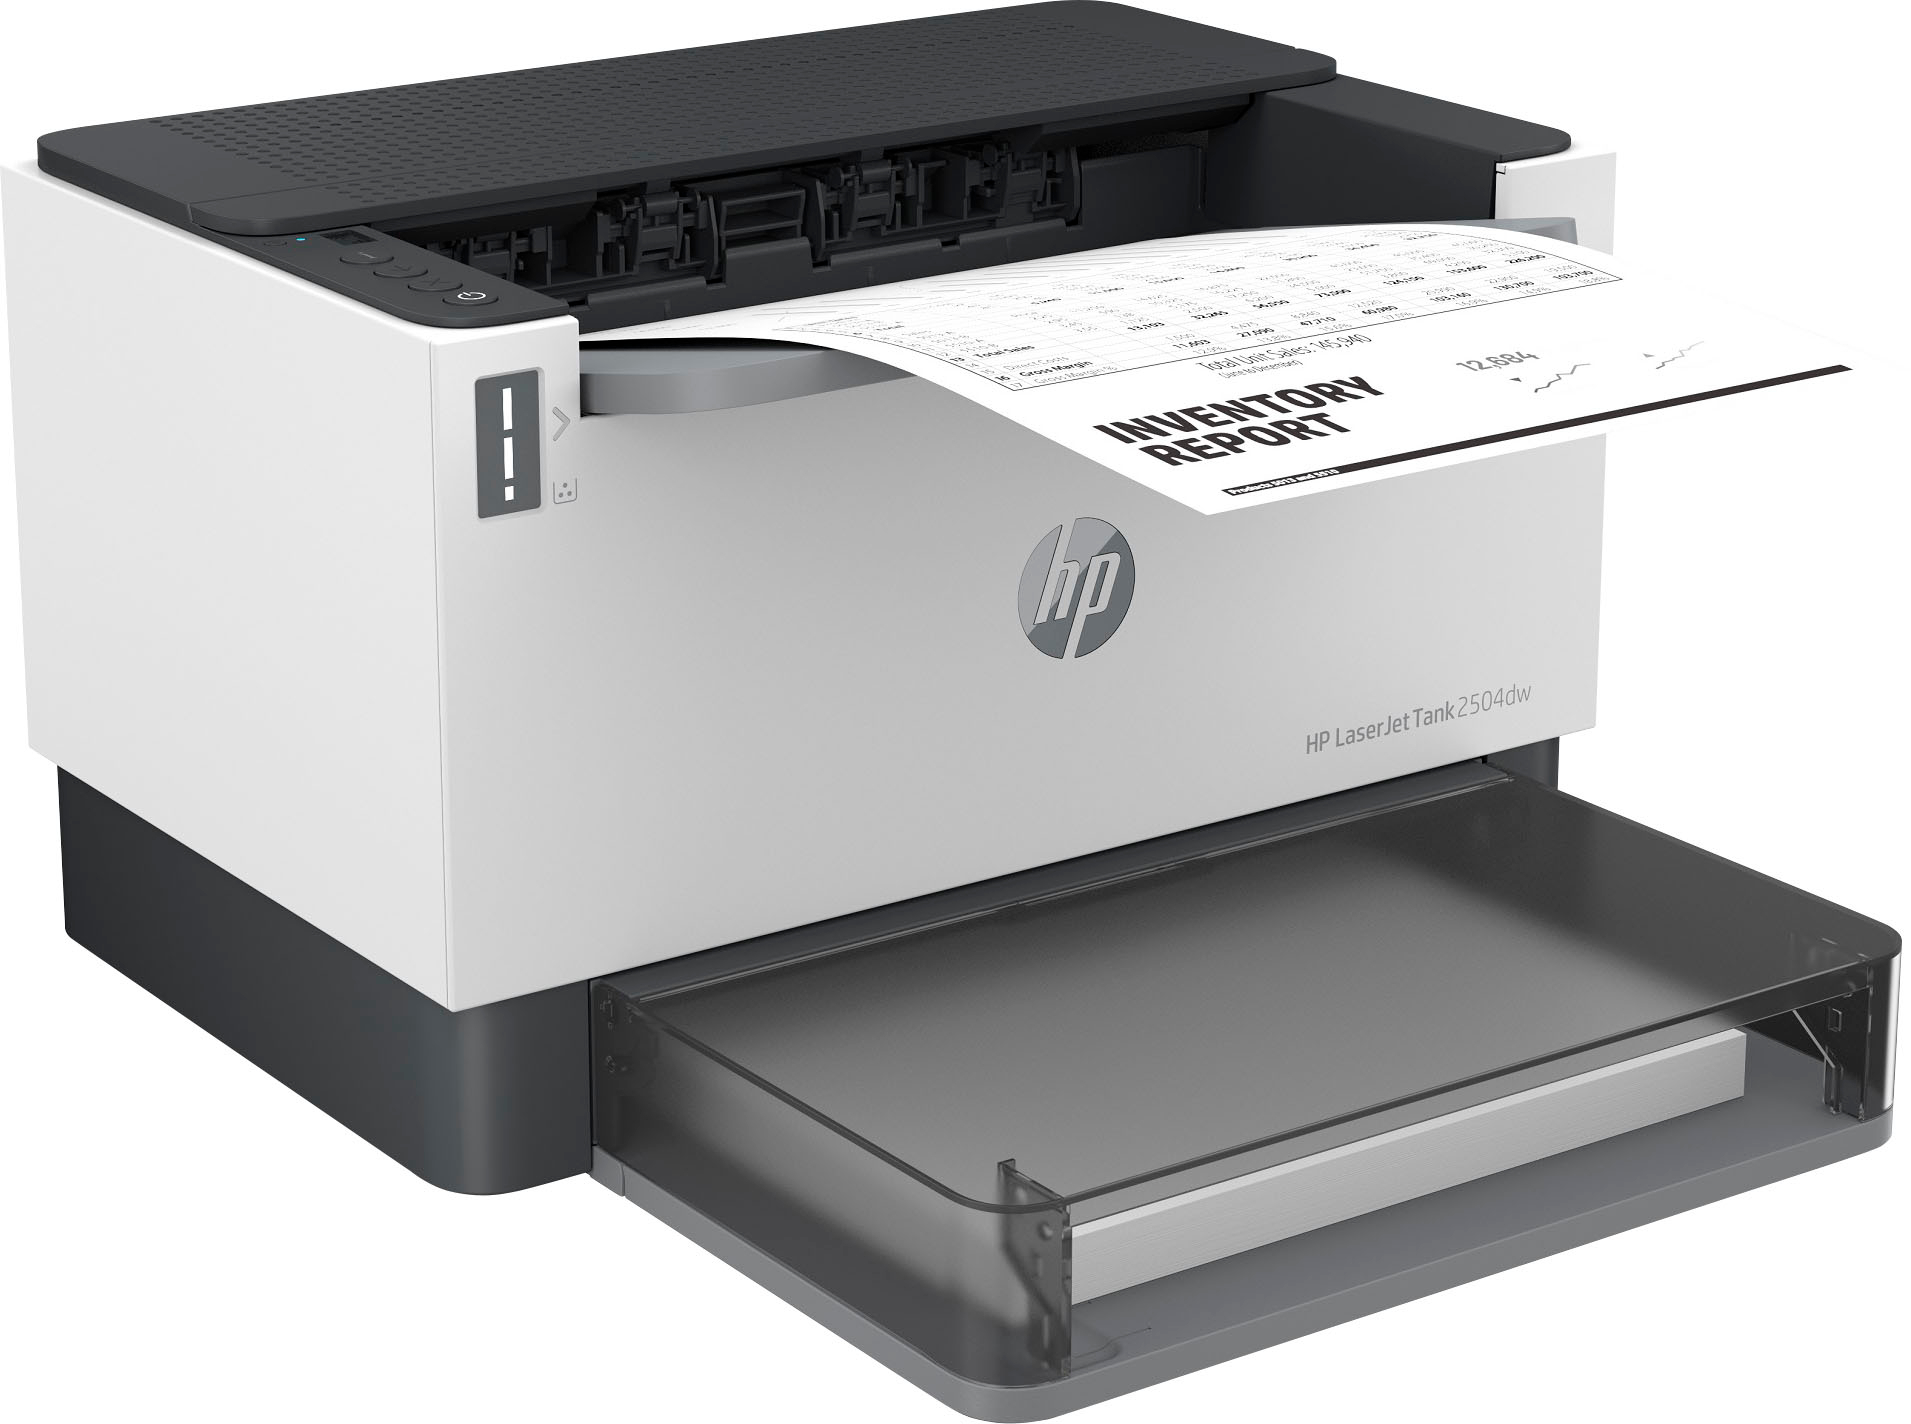 Angle View: HP - LaserJet Tank 2504dw Wireless Black-and-White Laser Printer preloaded with up to 2 years of toner - White